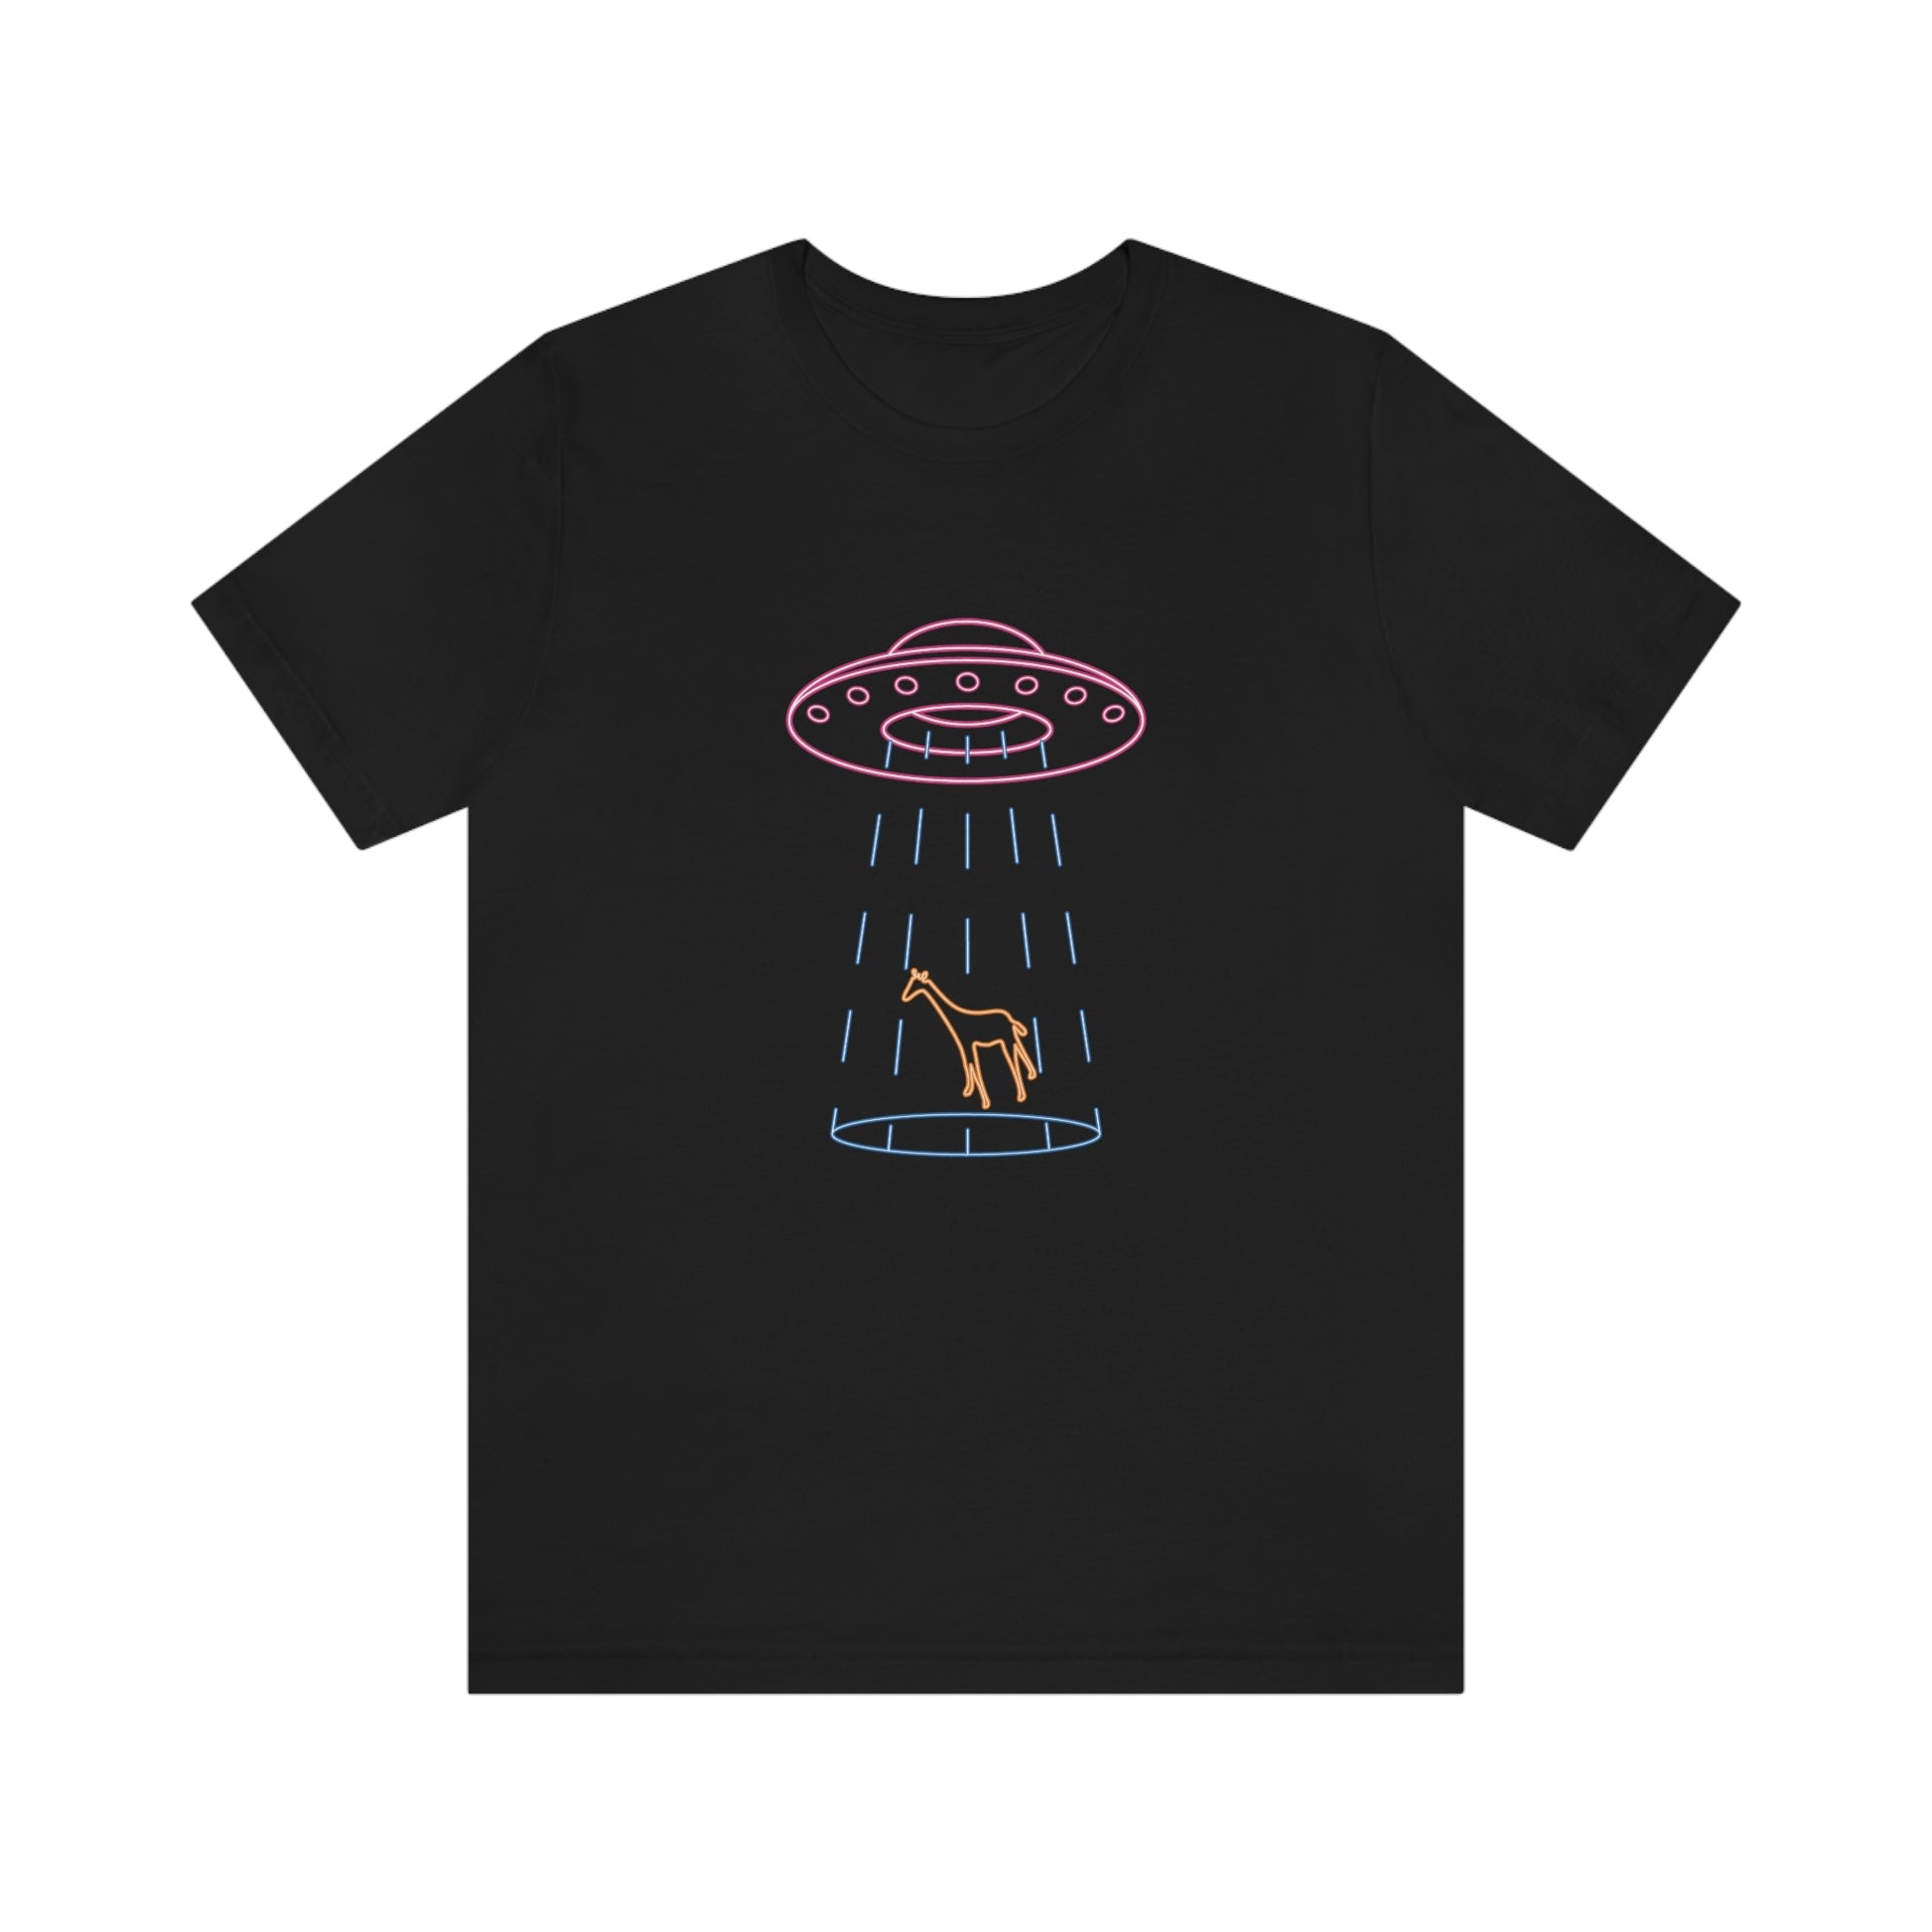 Black T-Shirt with fun multi-coloured neon design of a ufo beaming up a giraffe. Taken from the TEQNEON Ha Ha Land collection.